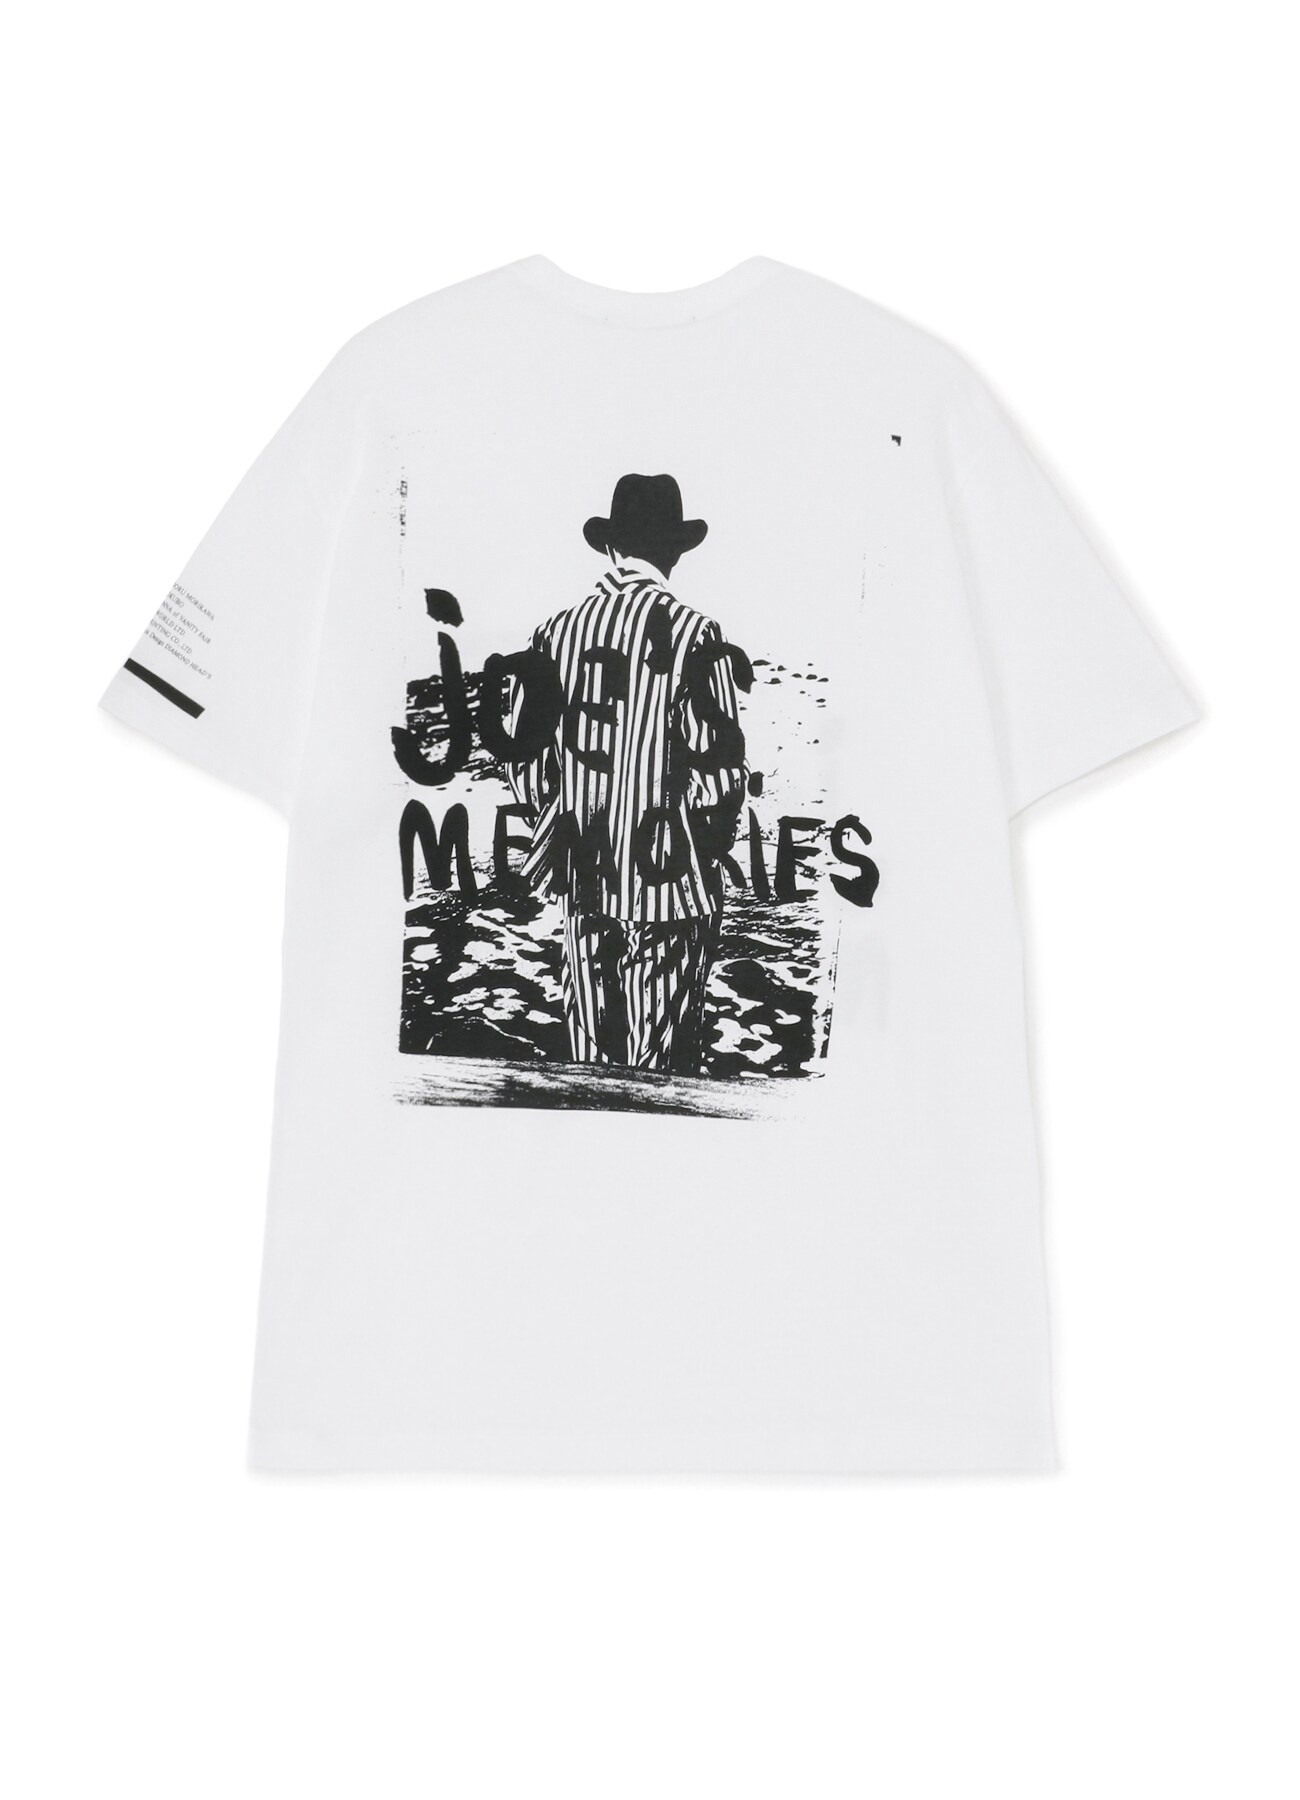 Y's for men LOOK BOOK T-shirt A